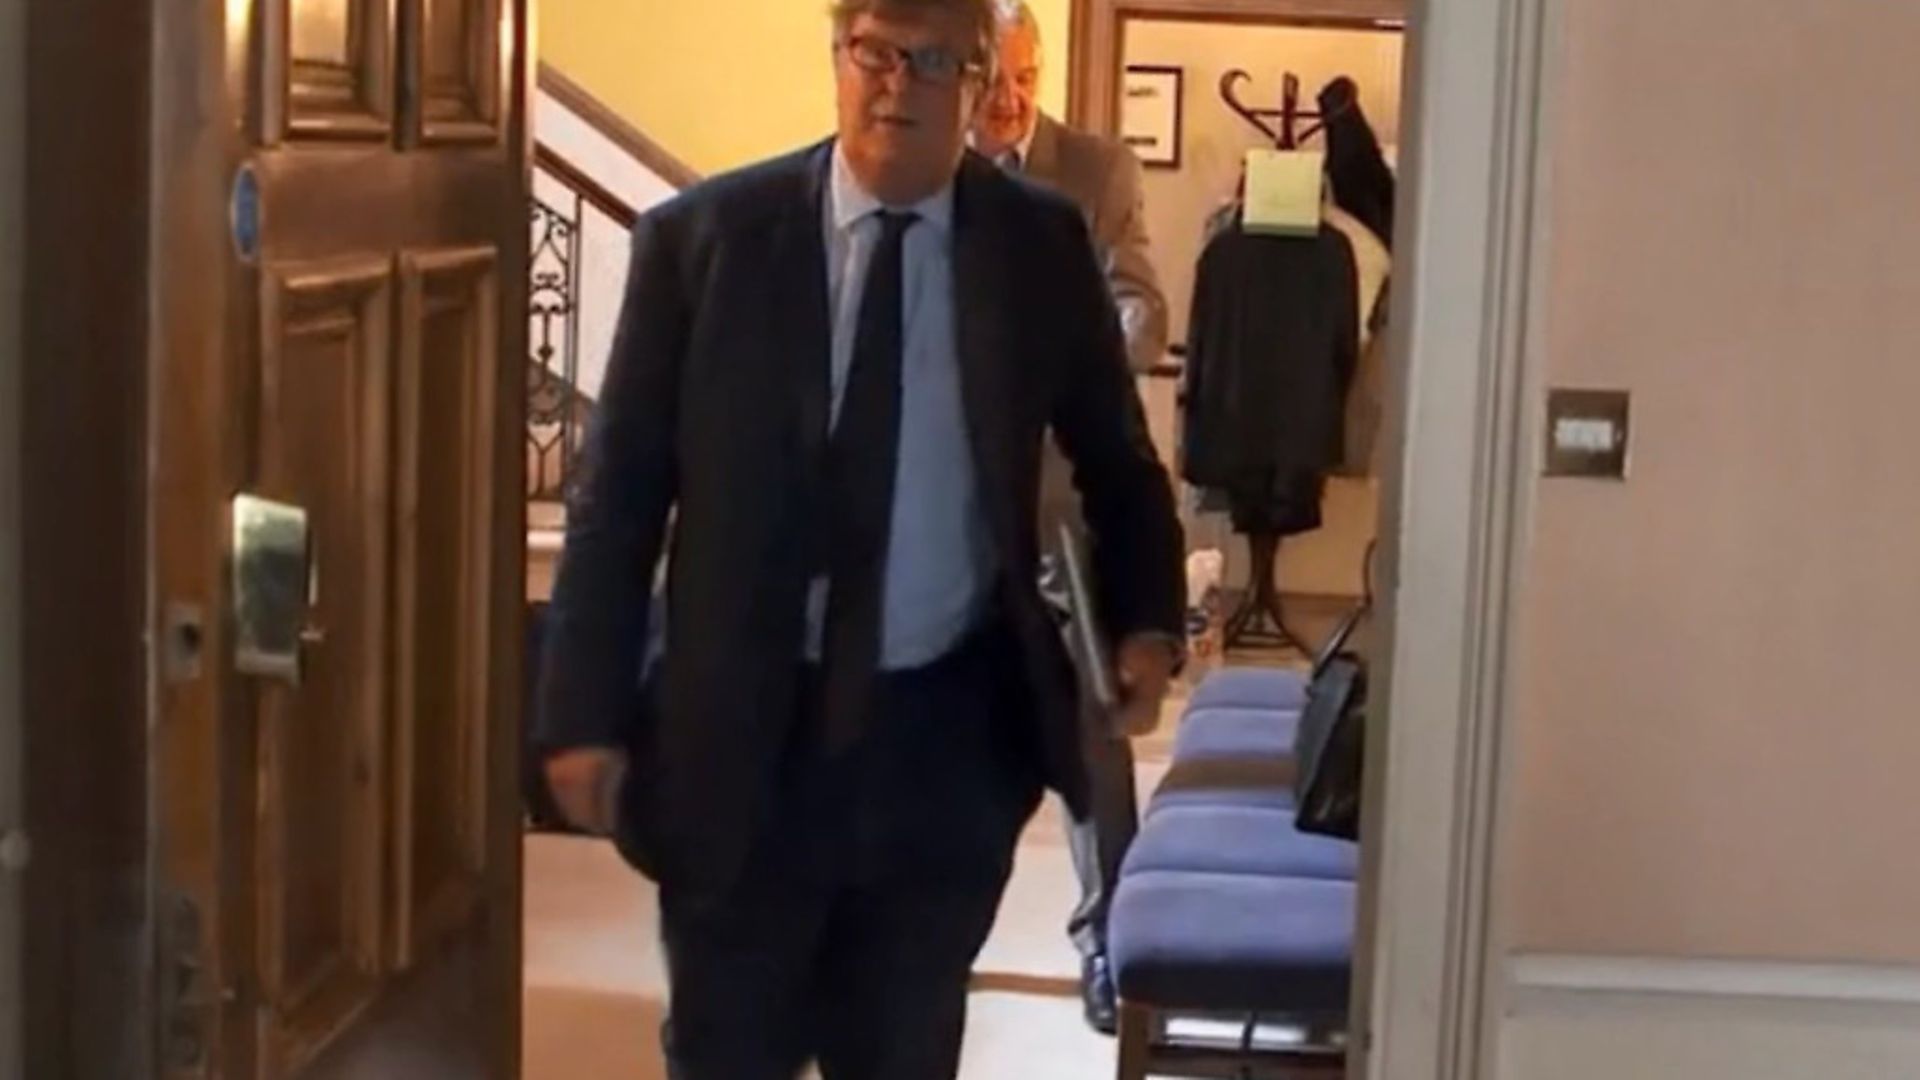 Crispin Odey appears in the Tories At War documentary. Photograph: Channel 4 - Credit: Archant